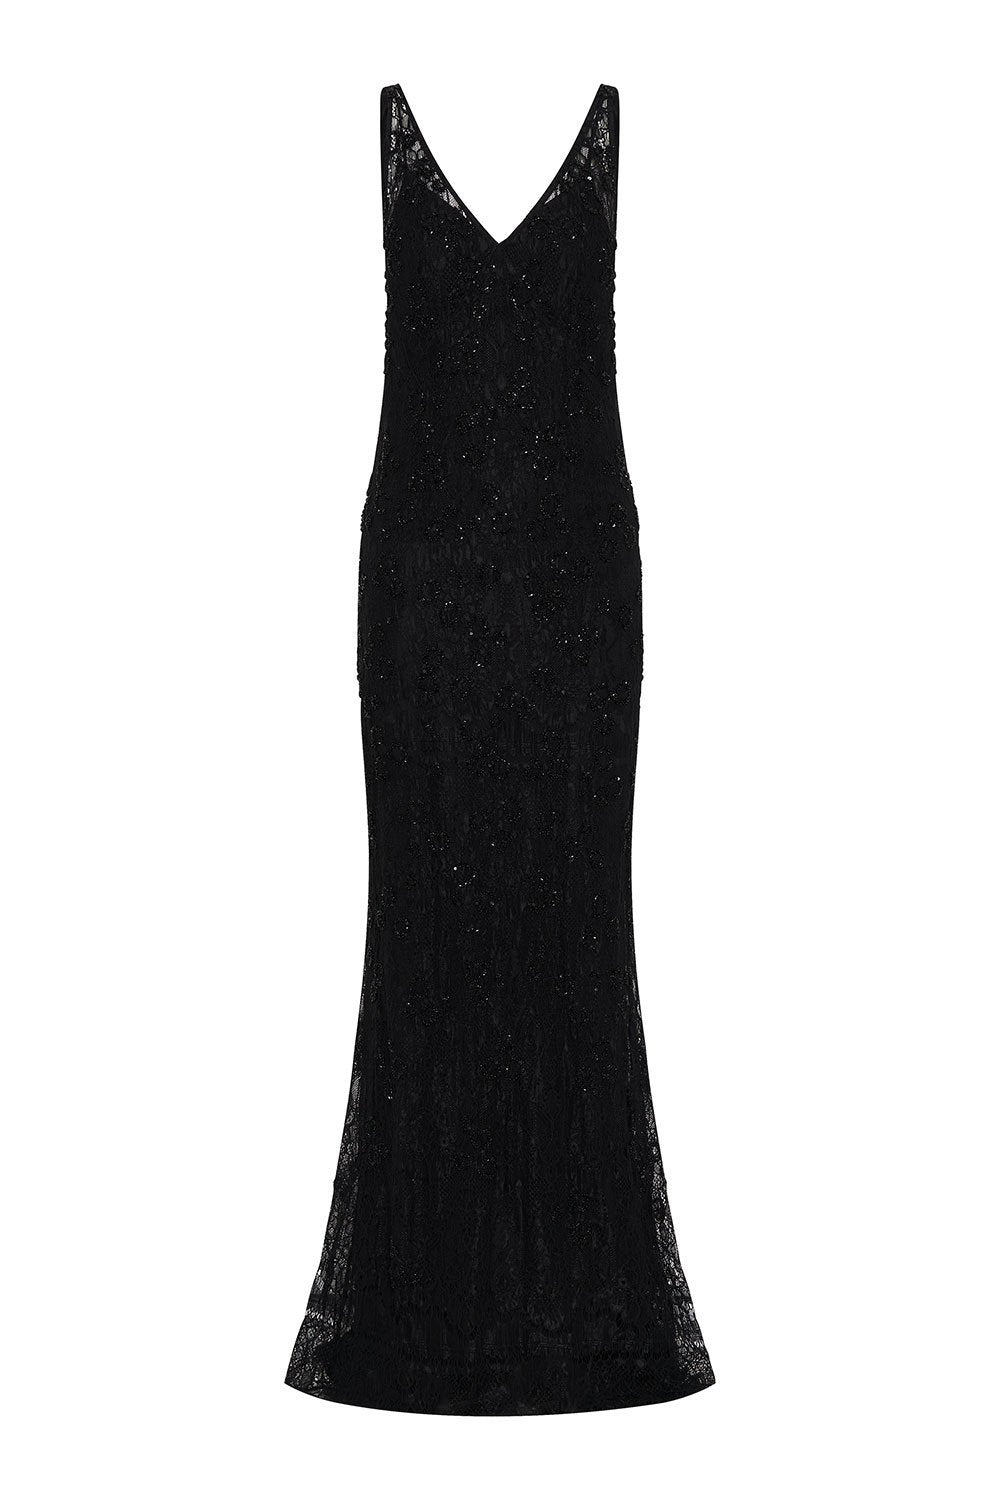 SHEER LACE GOWN BLACK